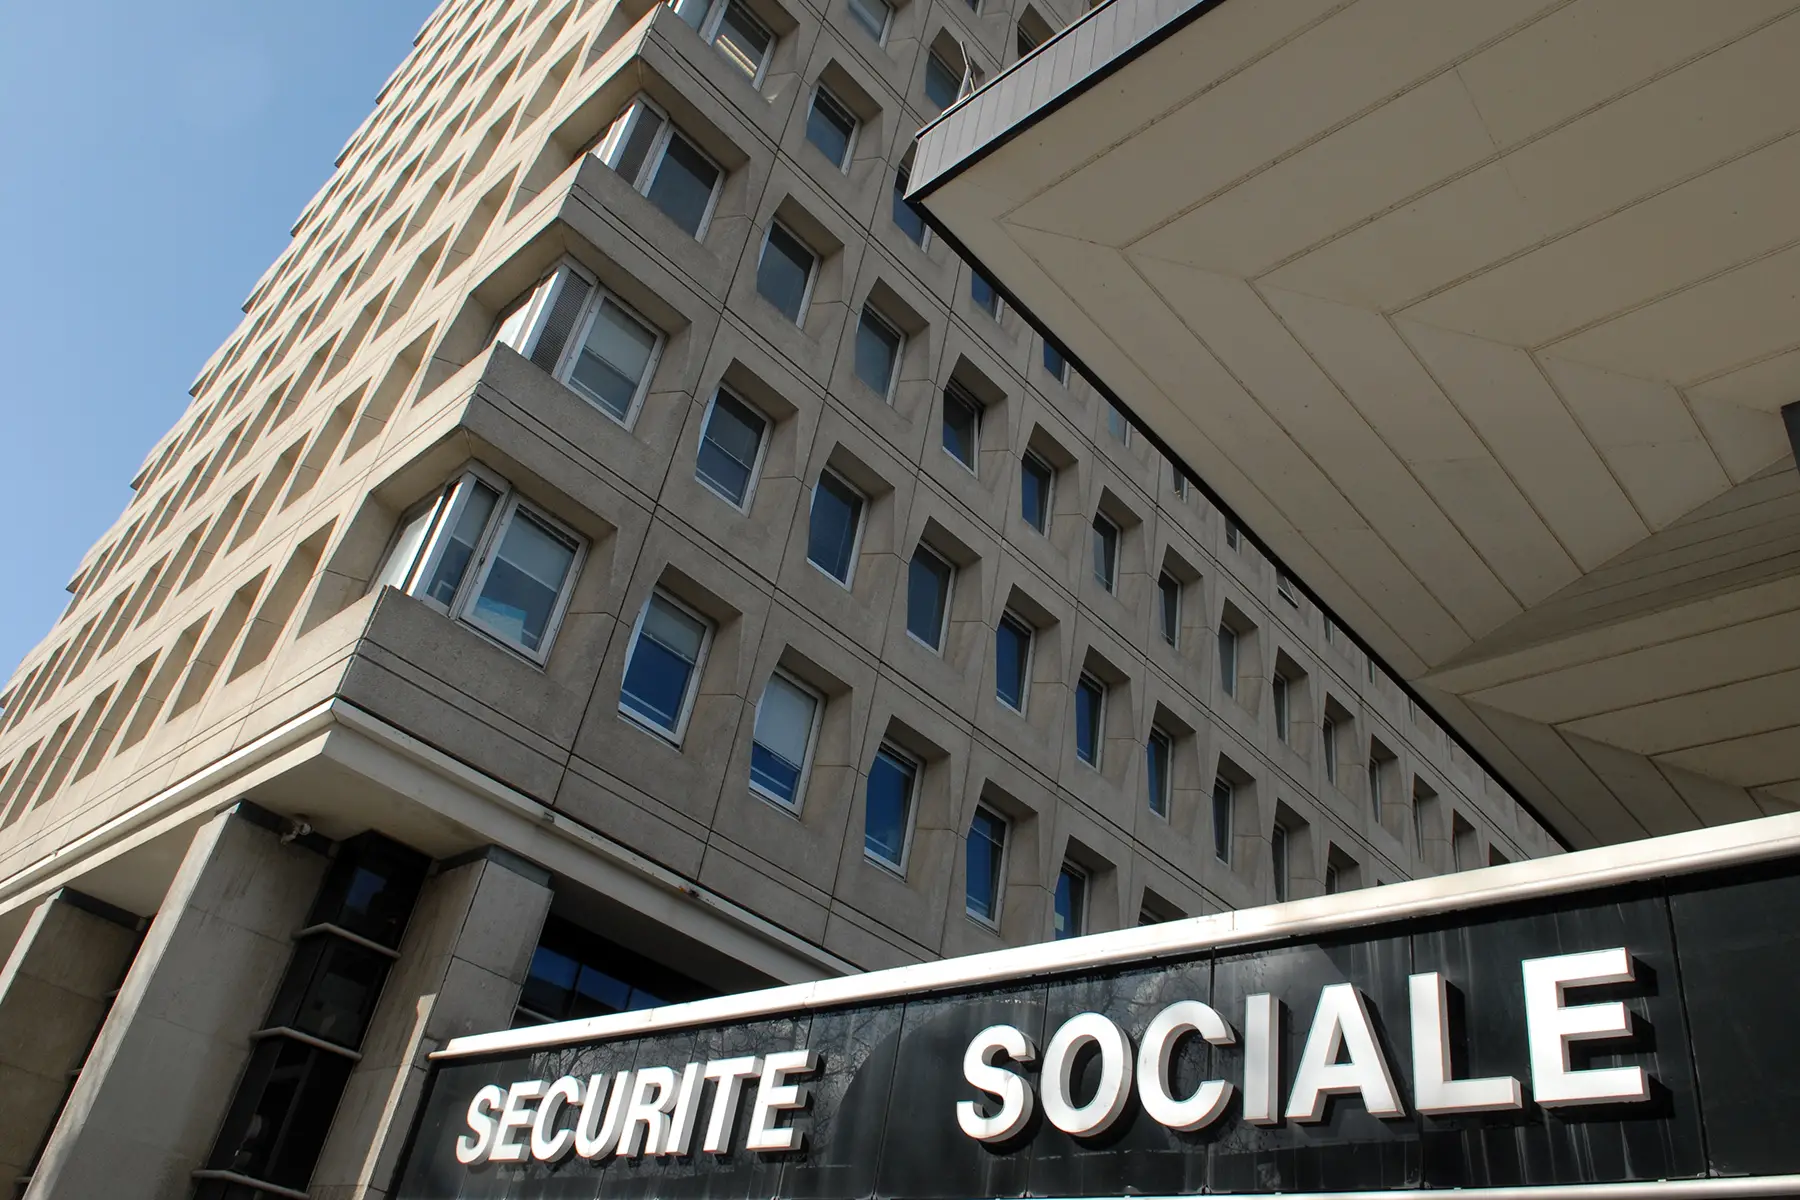 Social security building in Brittany